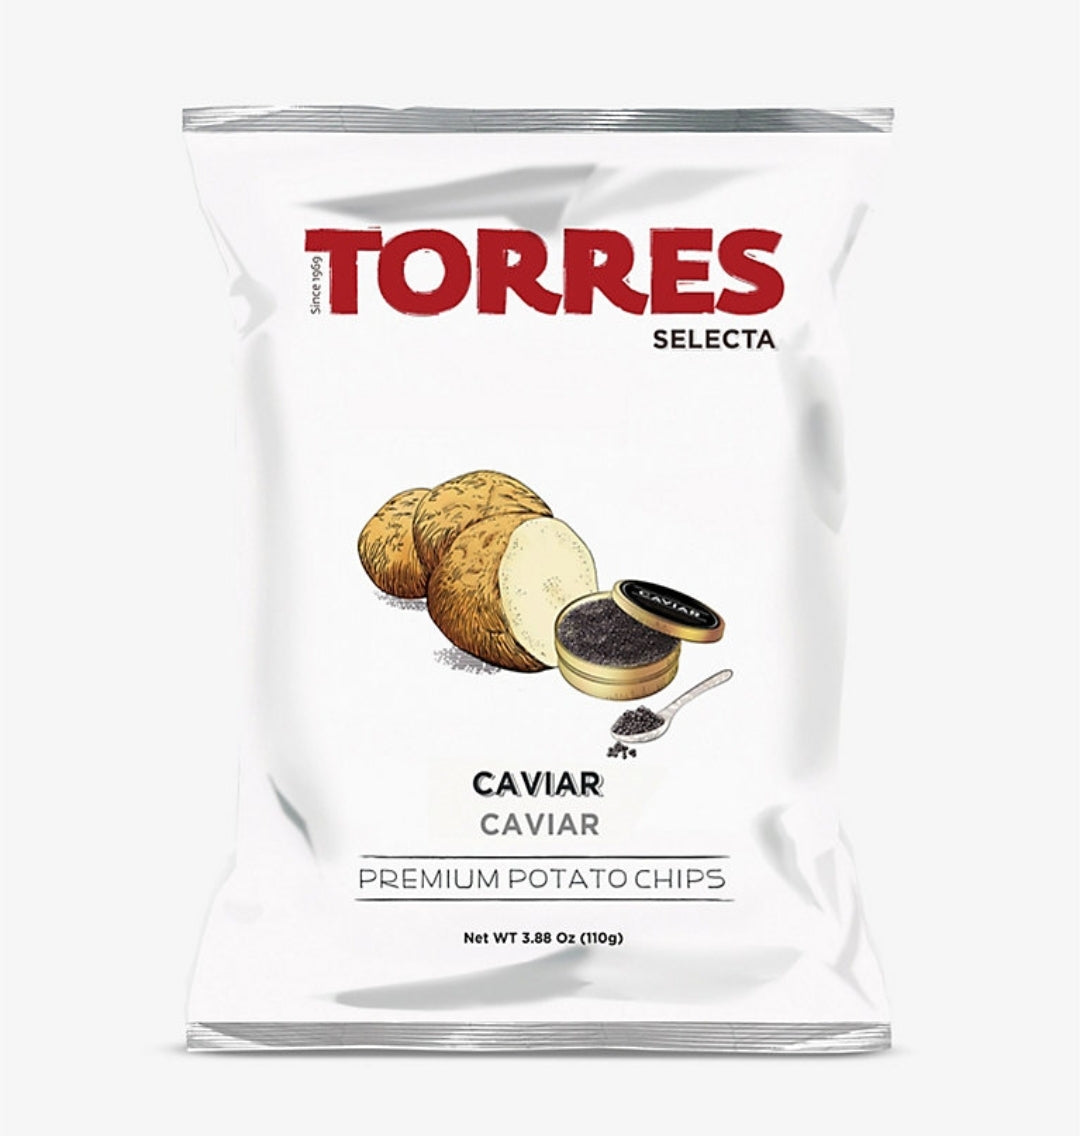 Additonal Venchi Chocolate and Torres Chips